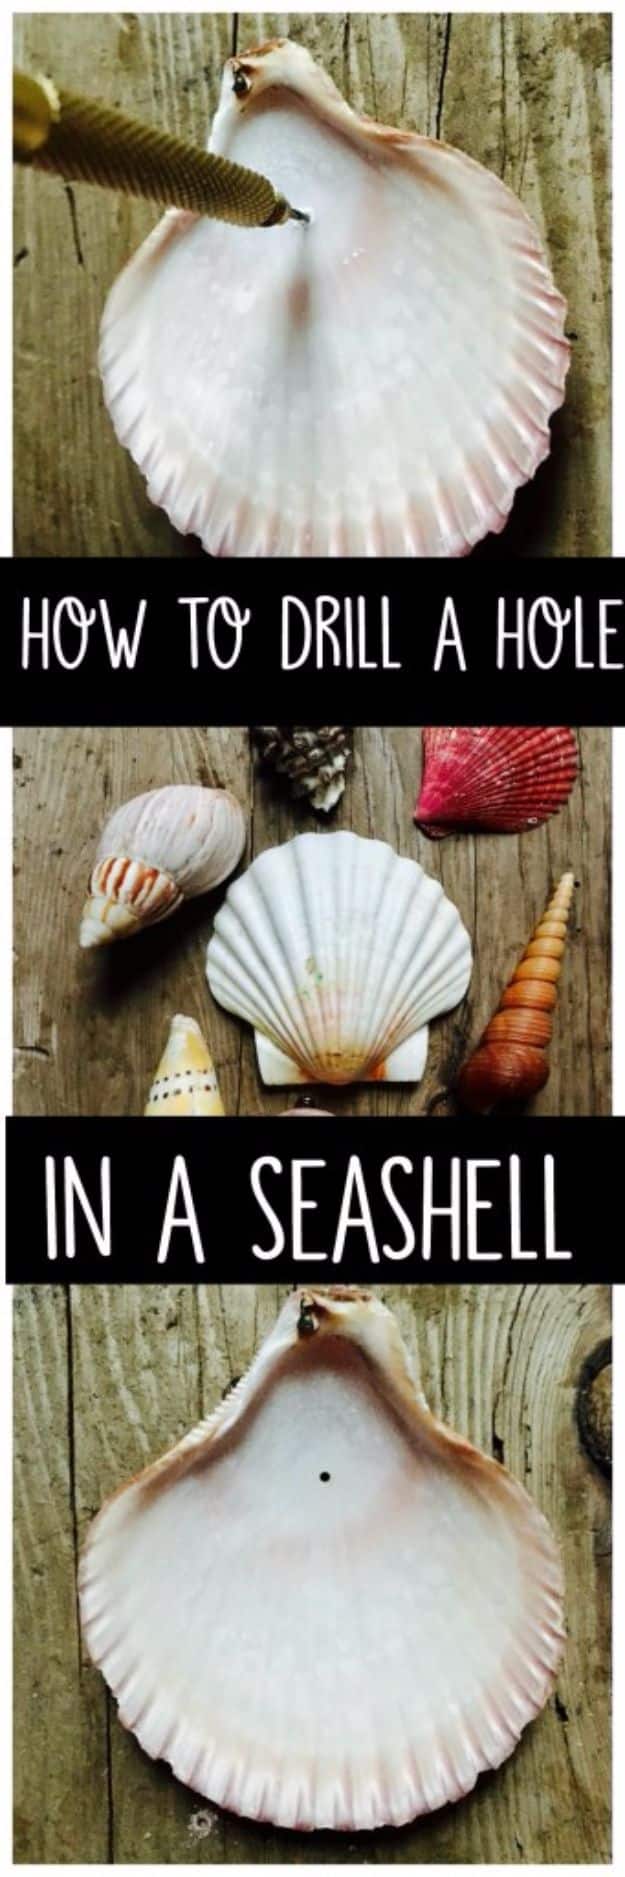 DIY Ideas With Sea Shells - Drill A Hole In A Seashell - Best Cute Sea Shell Crafts for Adults and Kids - Easy Beach House Decor Ideas With Sand and Large Shell Art - Wall Decor and Home, Bedroom and Bath - Cheap DIY Projects Make Awesome Homemade Gifts http://diyjoy.com/diy-ideas-sea-shells